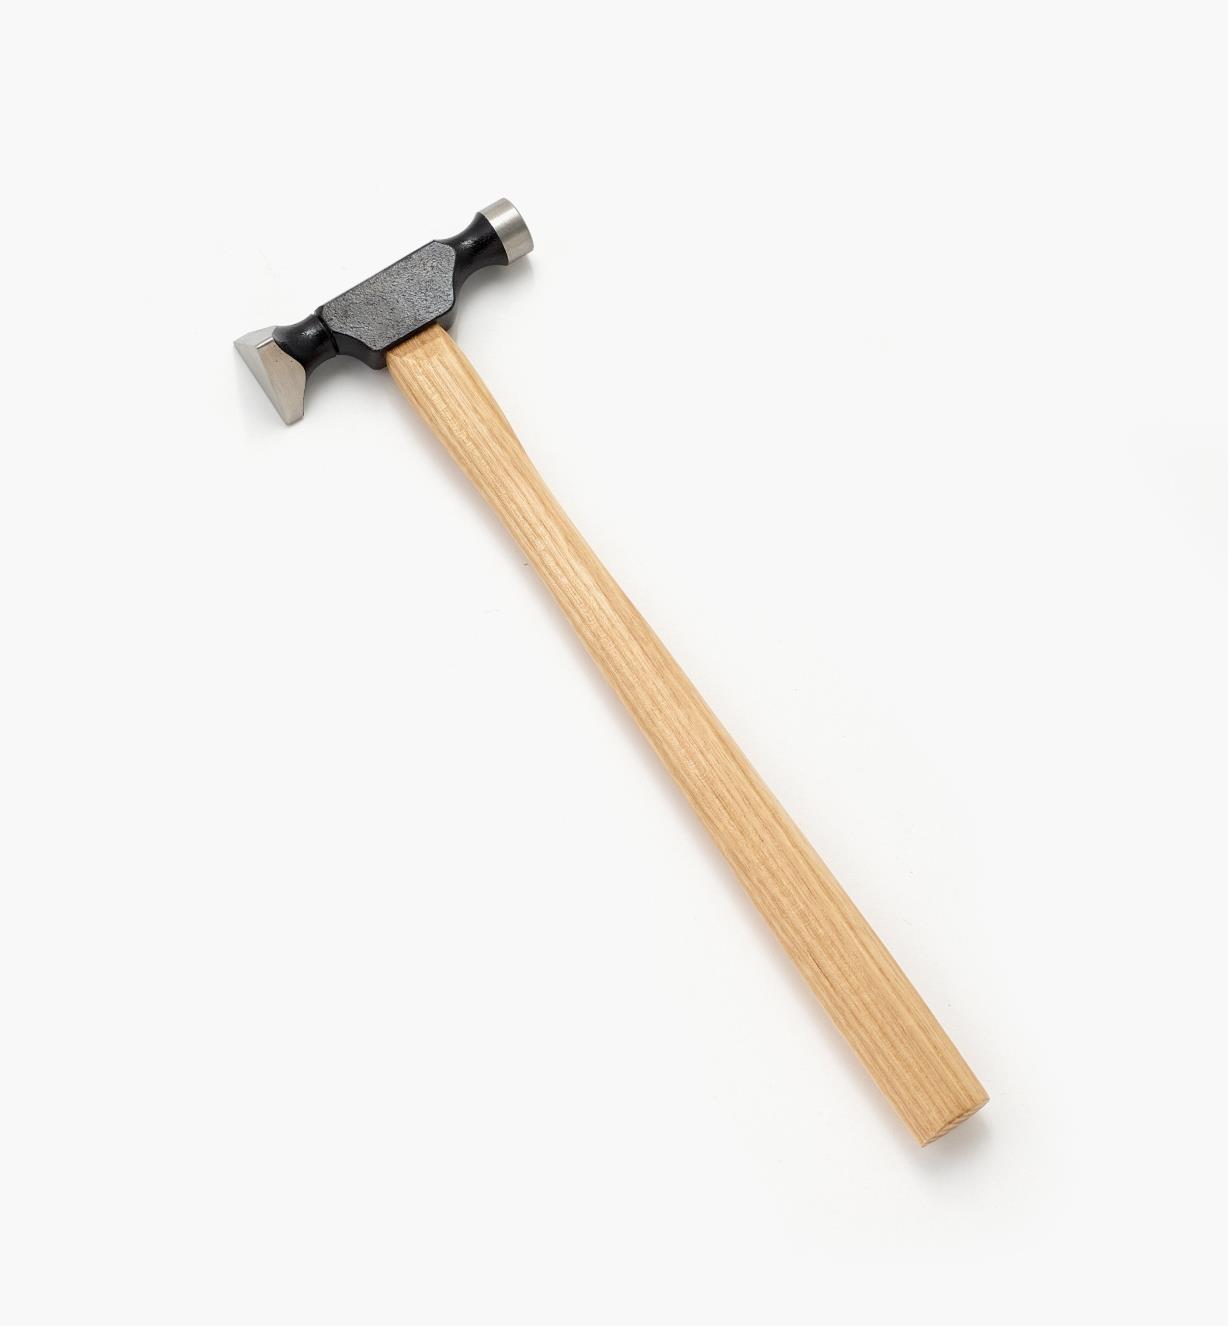 05K9923 - Picture Framing/Glazier's Hammer